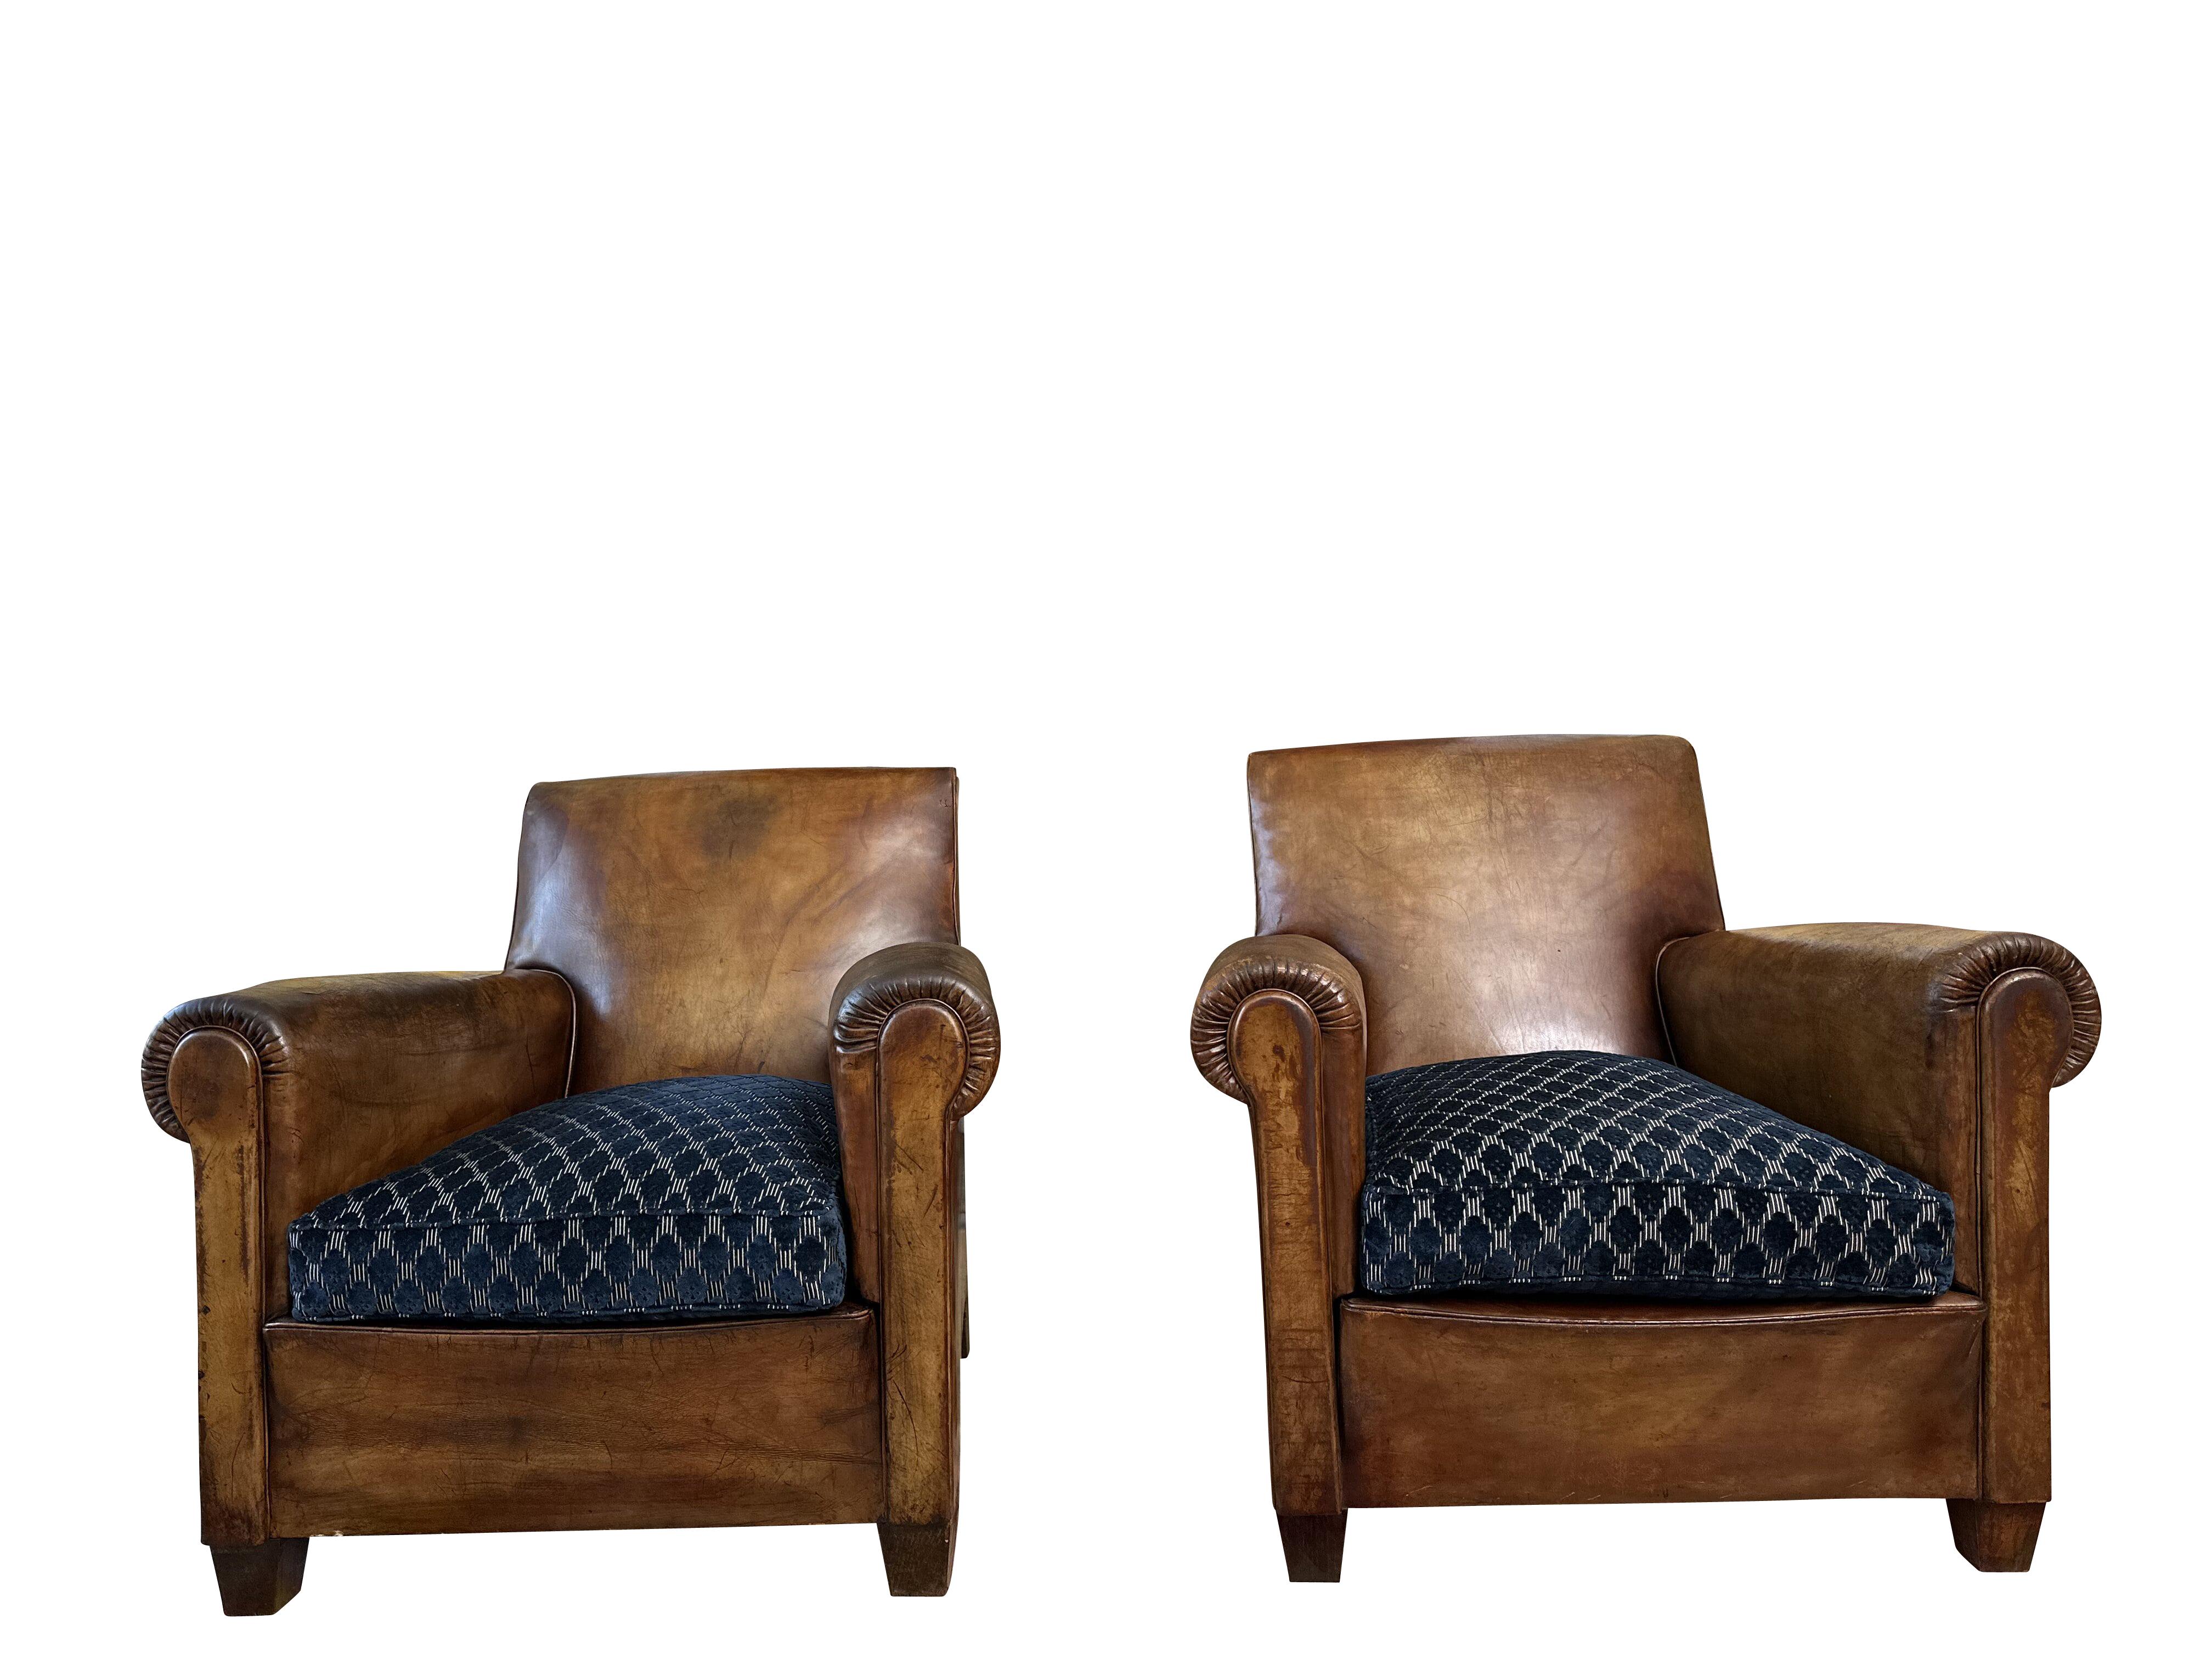 French 1930's Vintage Art Deco Leather Club Chairs - A Pair For Sale